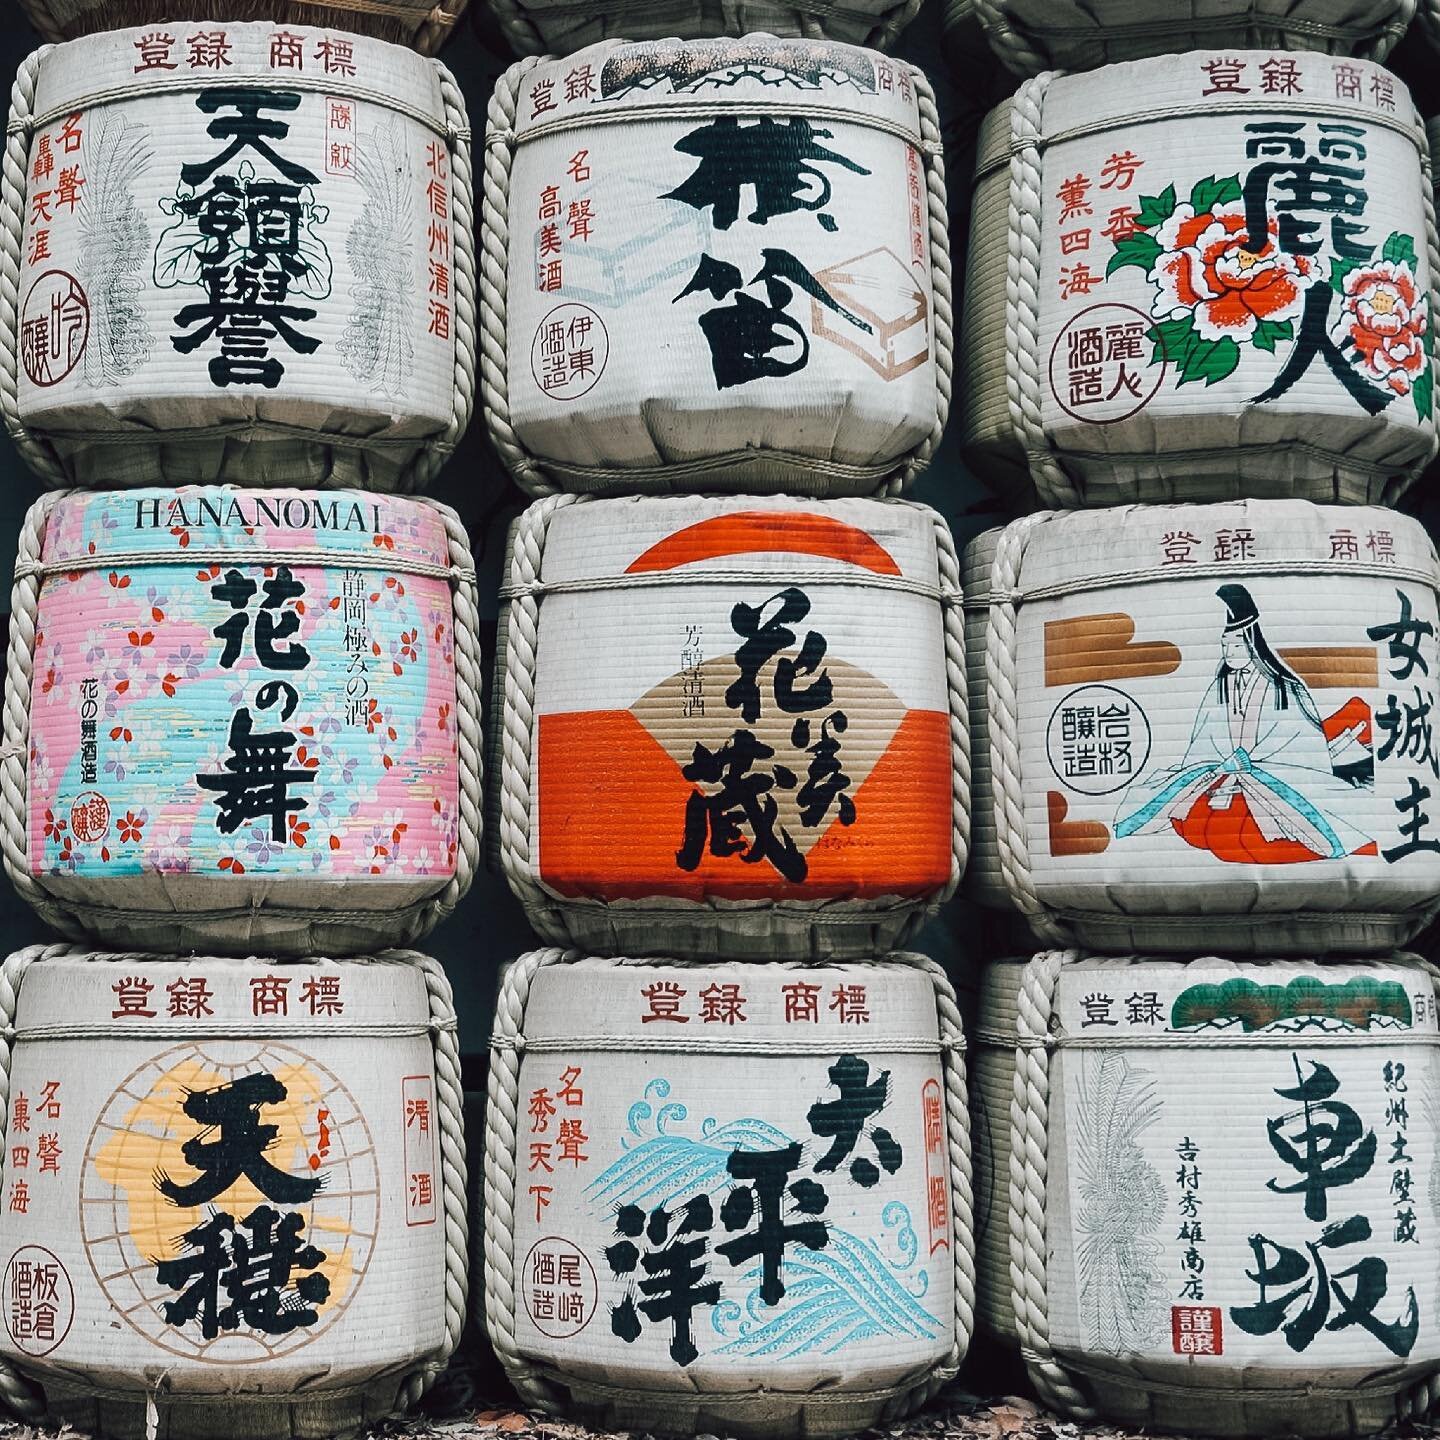 The beautiful and traditional sake barrels at the Meiji Jingu shrine. I&rsquo;m sure they&rsquo;re more beautiful inside than they are out. 😋